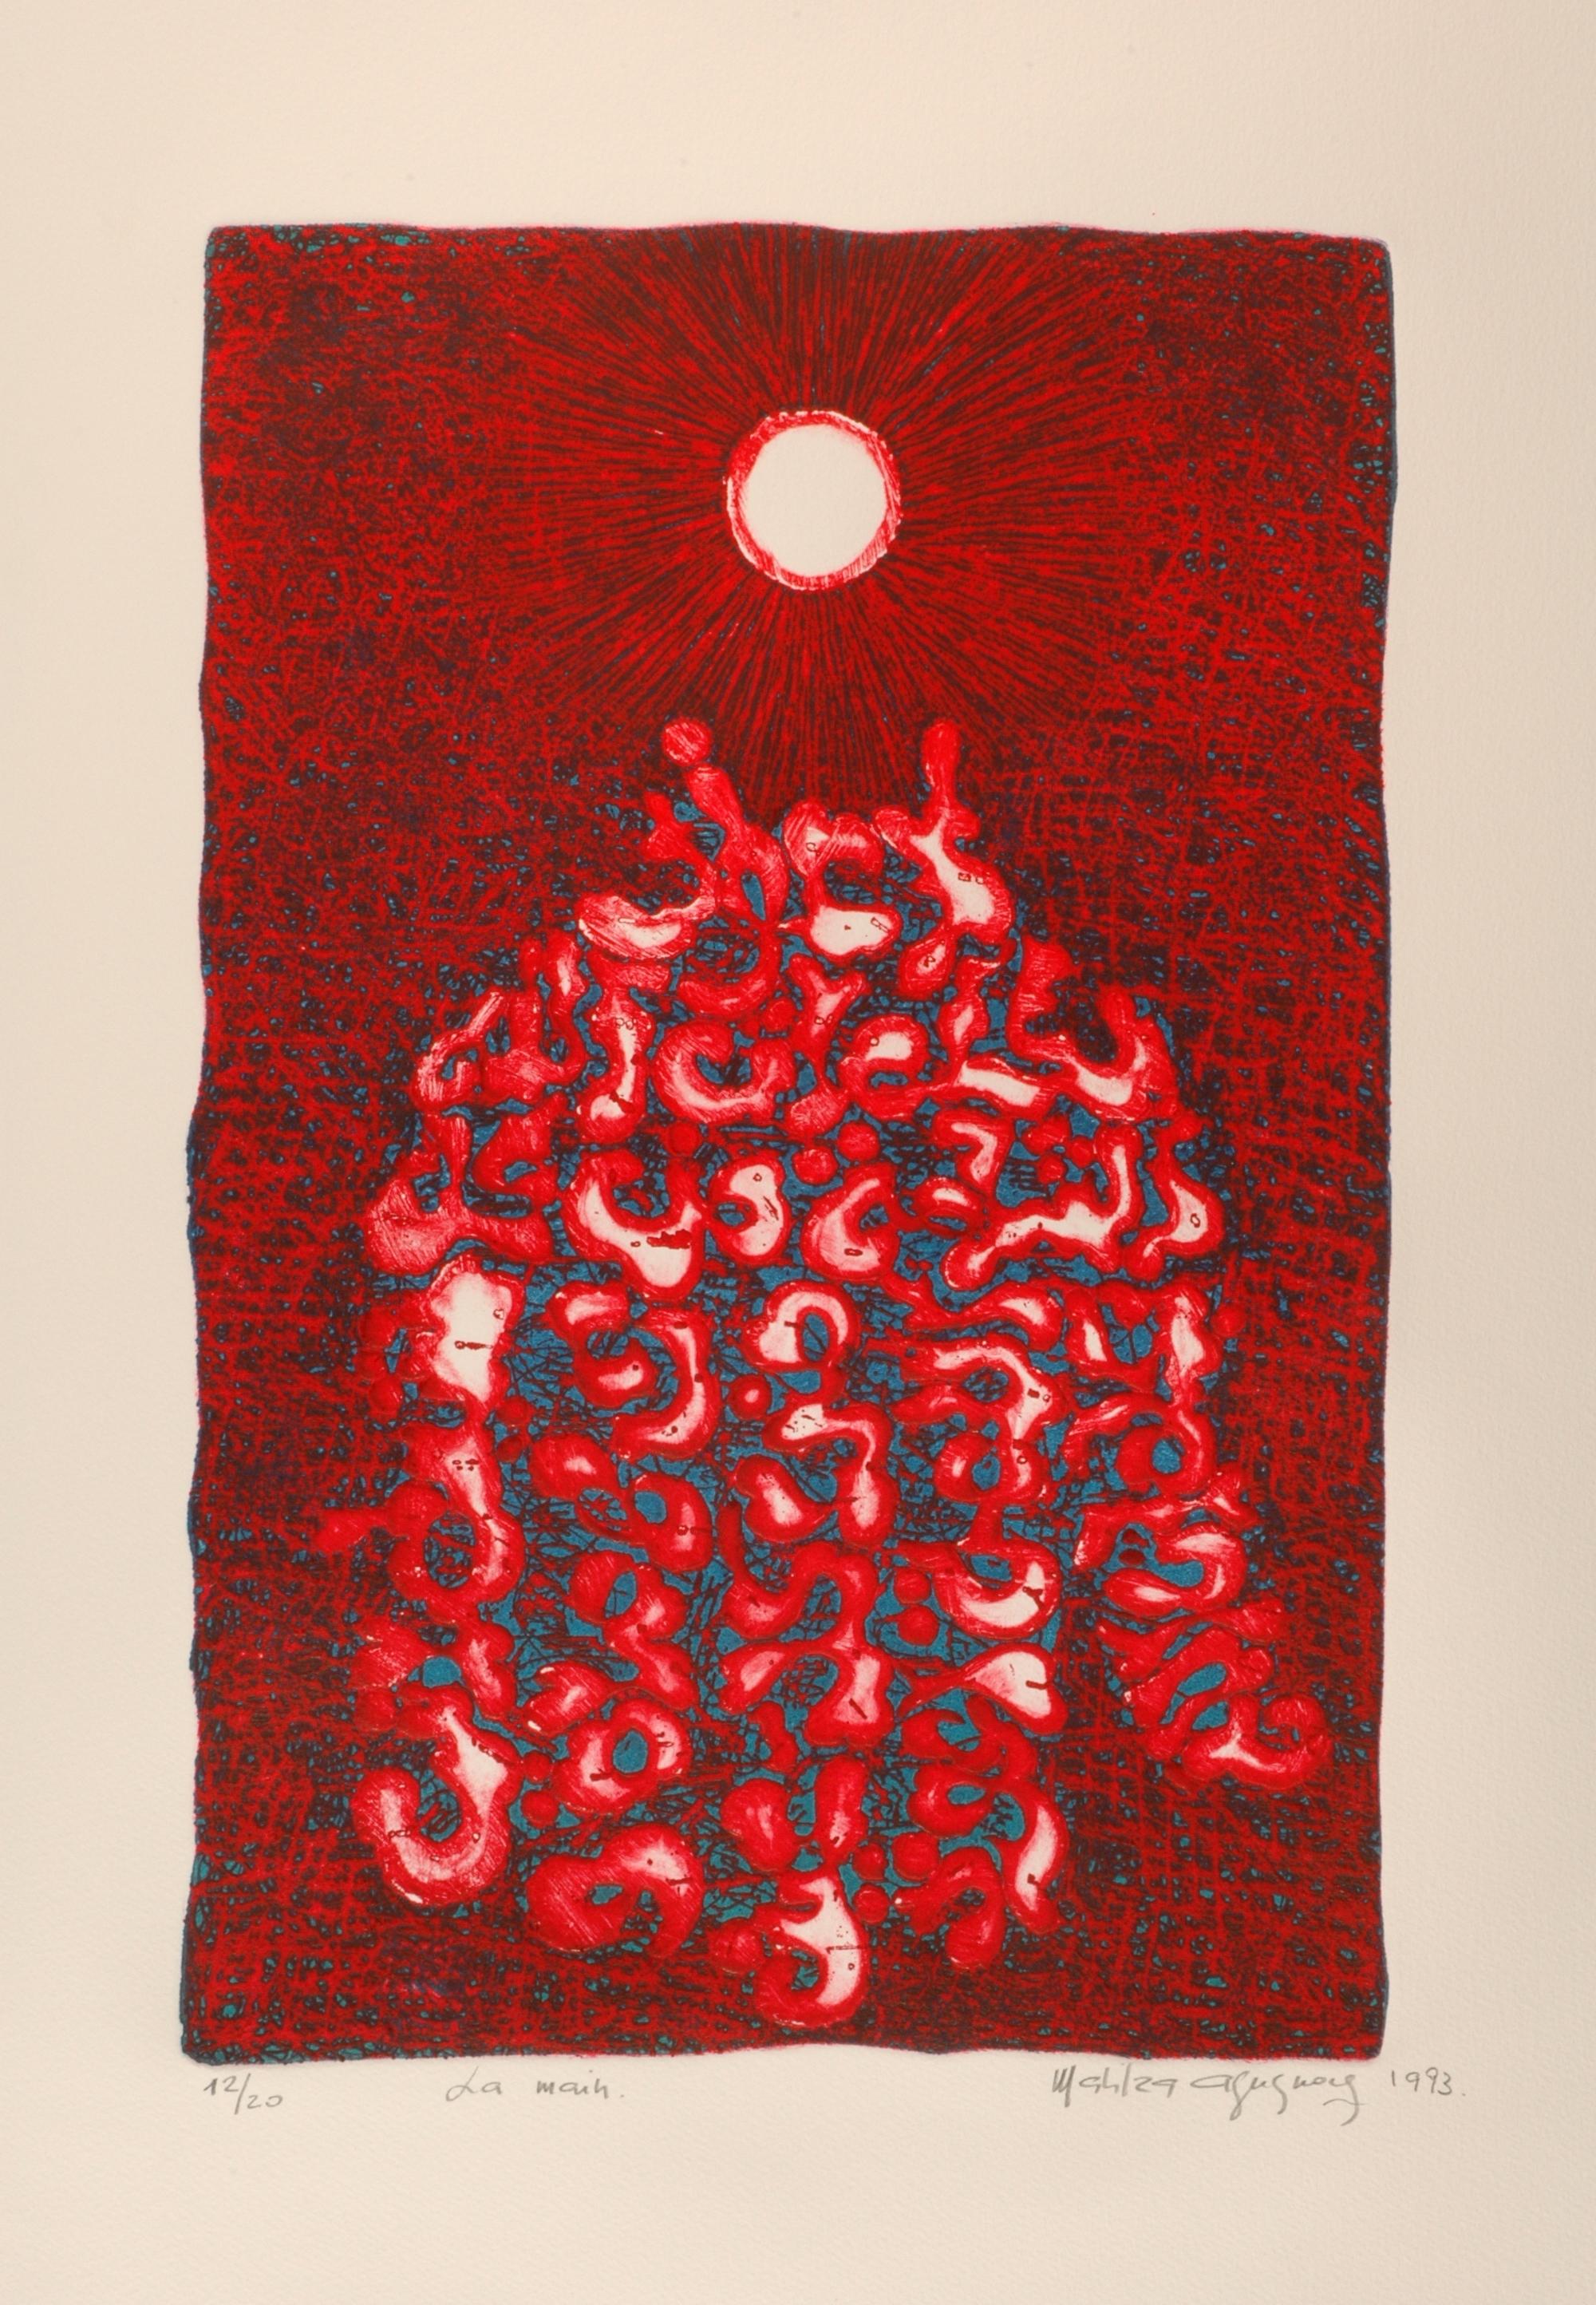 La Main (The Hand) - Limited Edition Red Abstract Etching - Print by Malika Agueznay